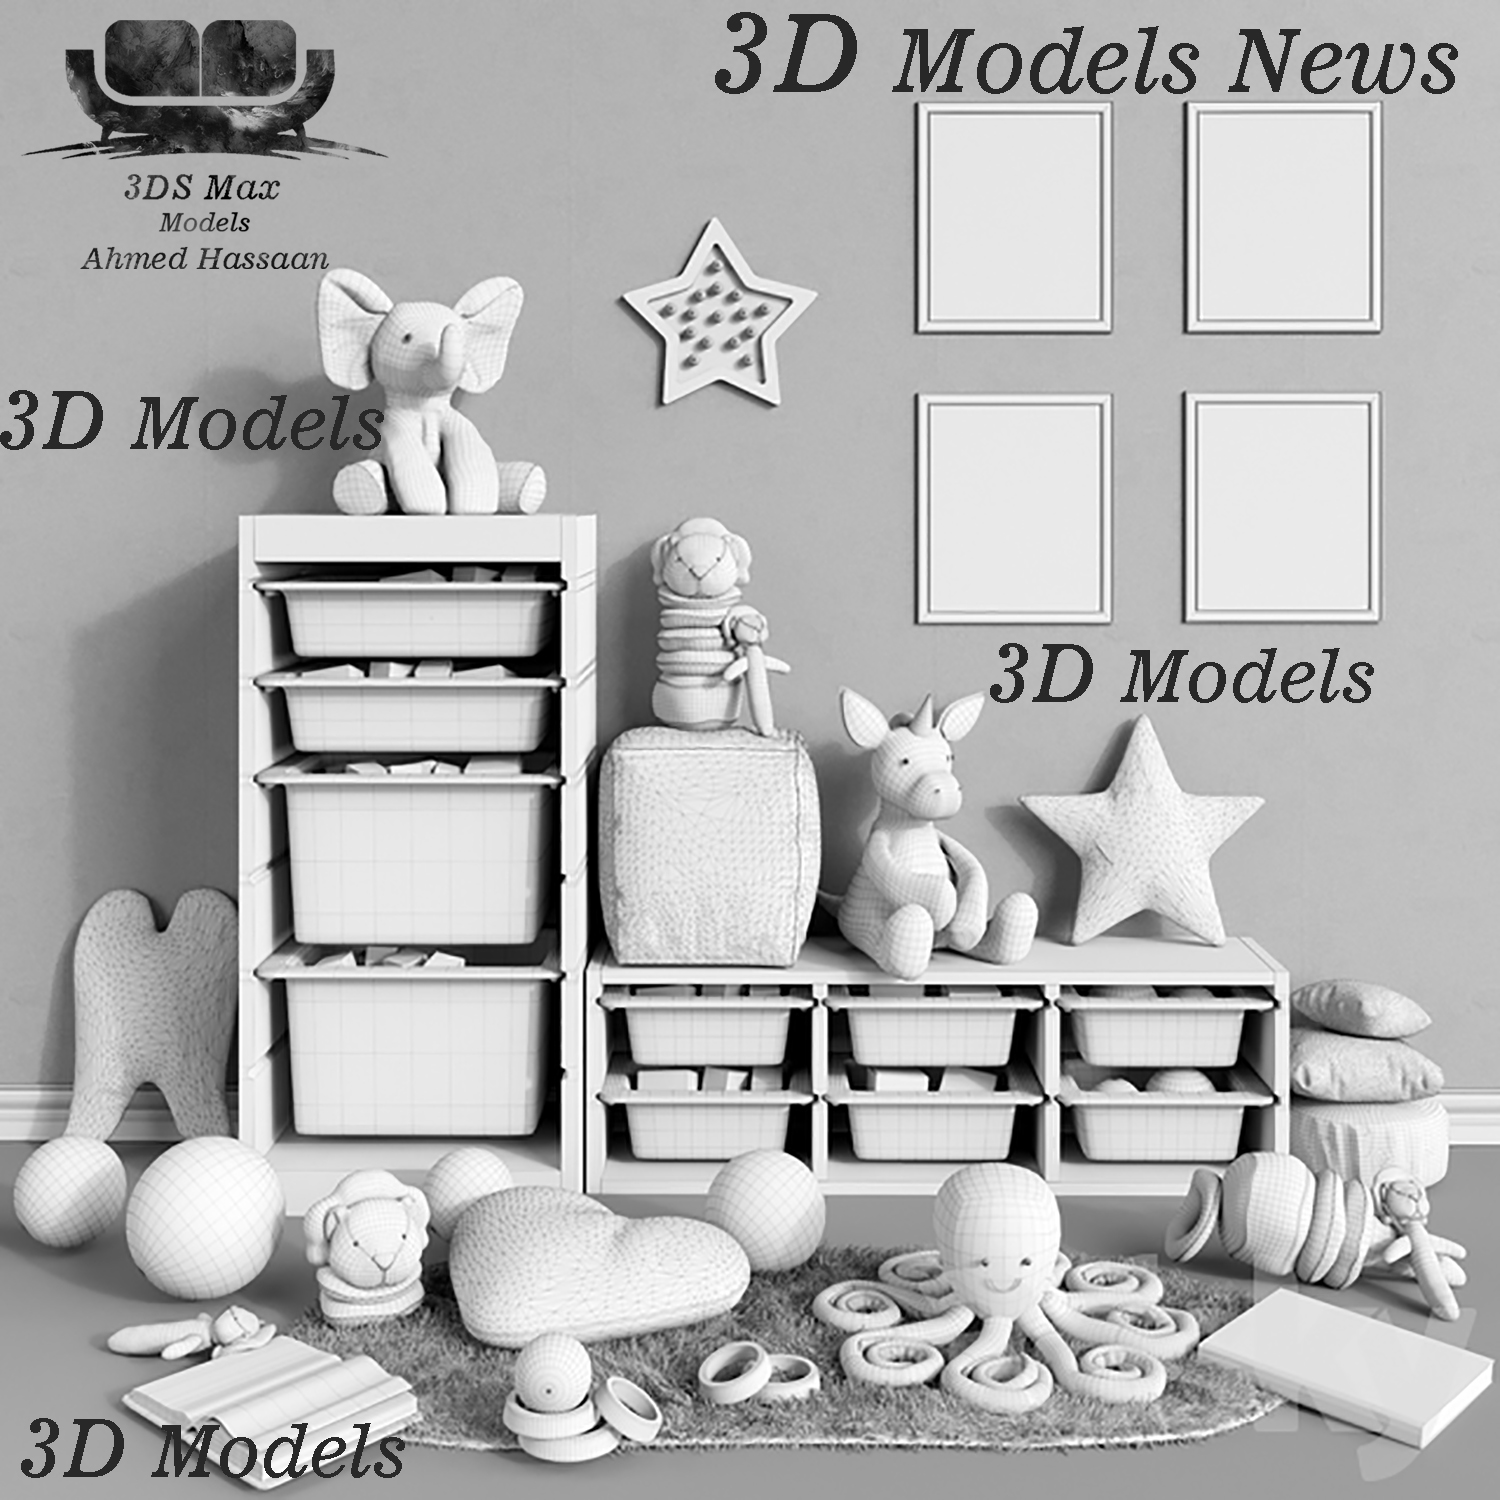 Model toys, decor and furniture for children's room